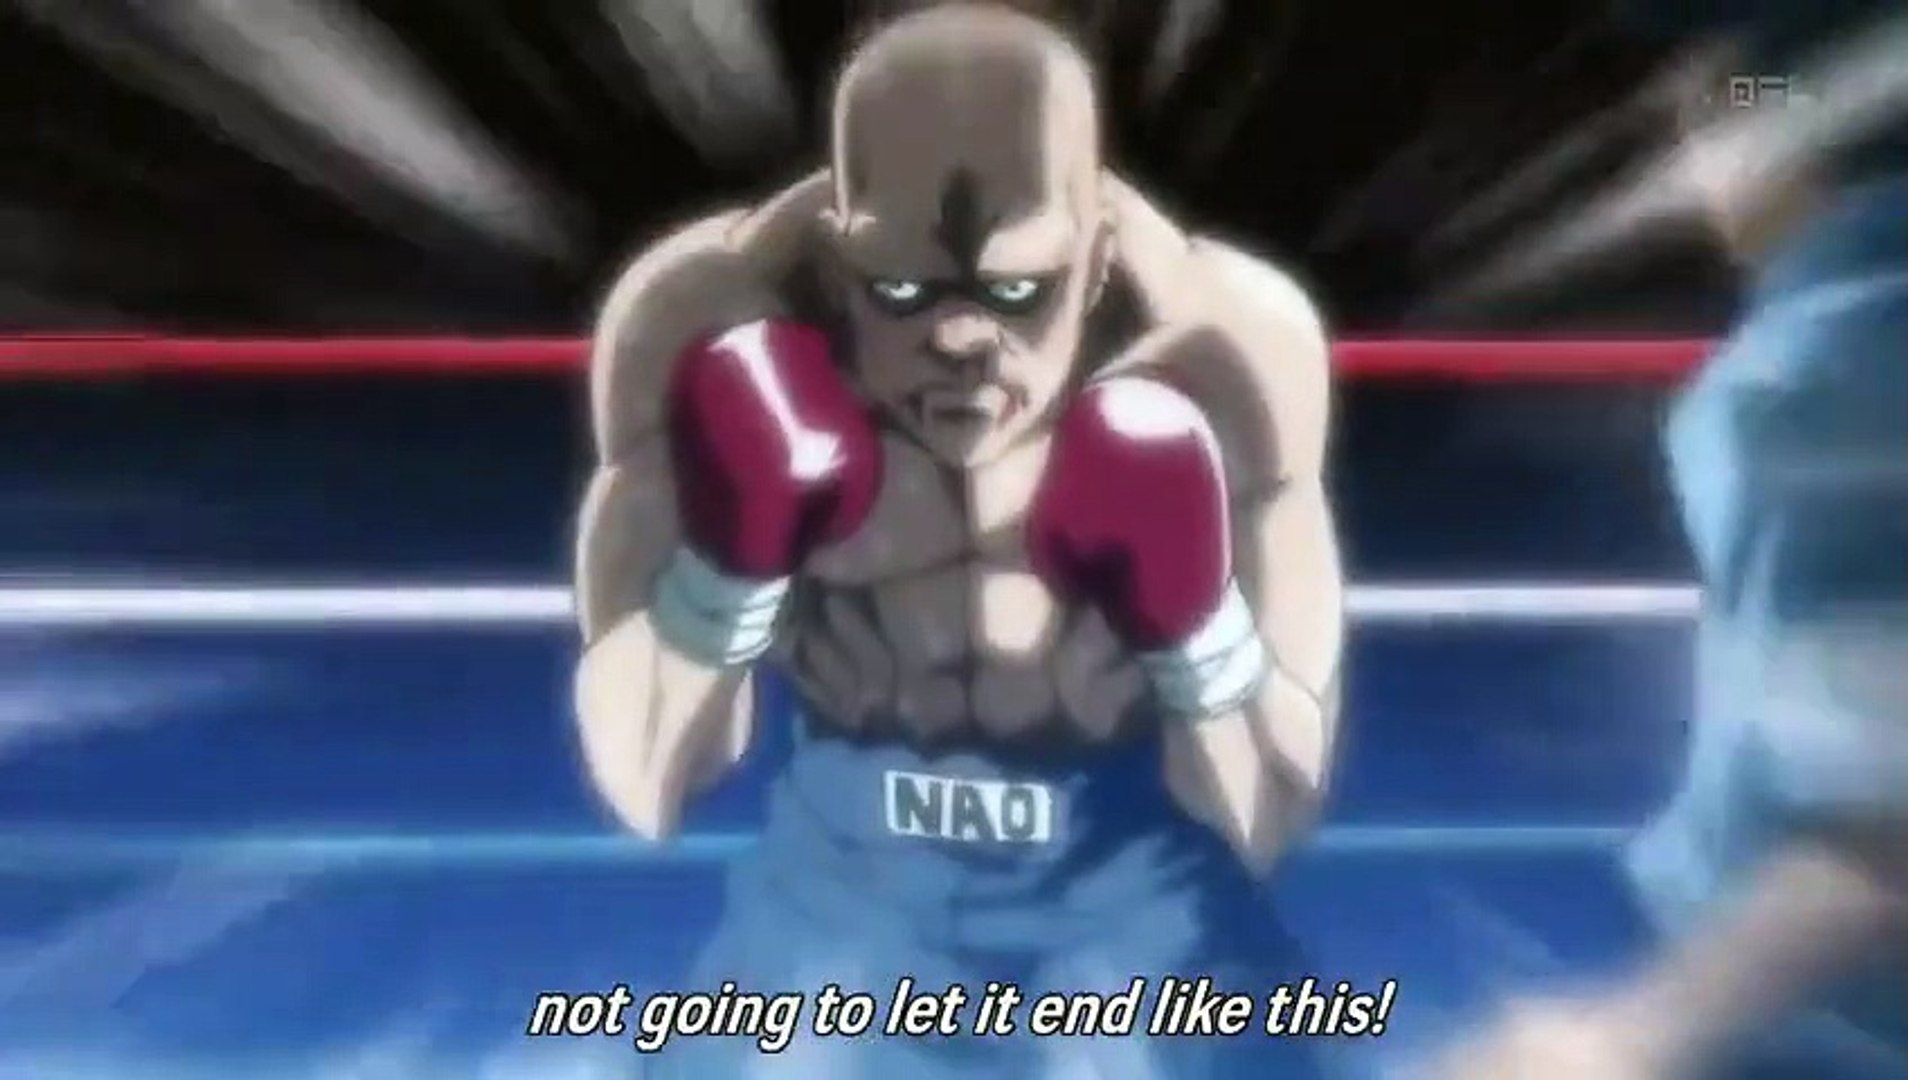 Hajime no Ippo - New Challenger - Ep11 HD Watch - video Dailymotion